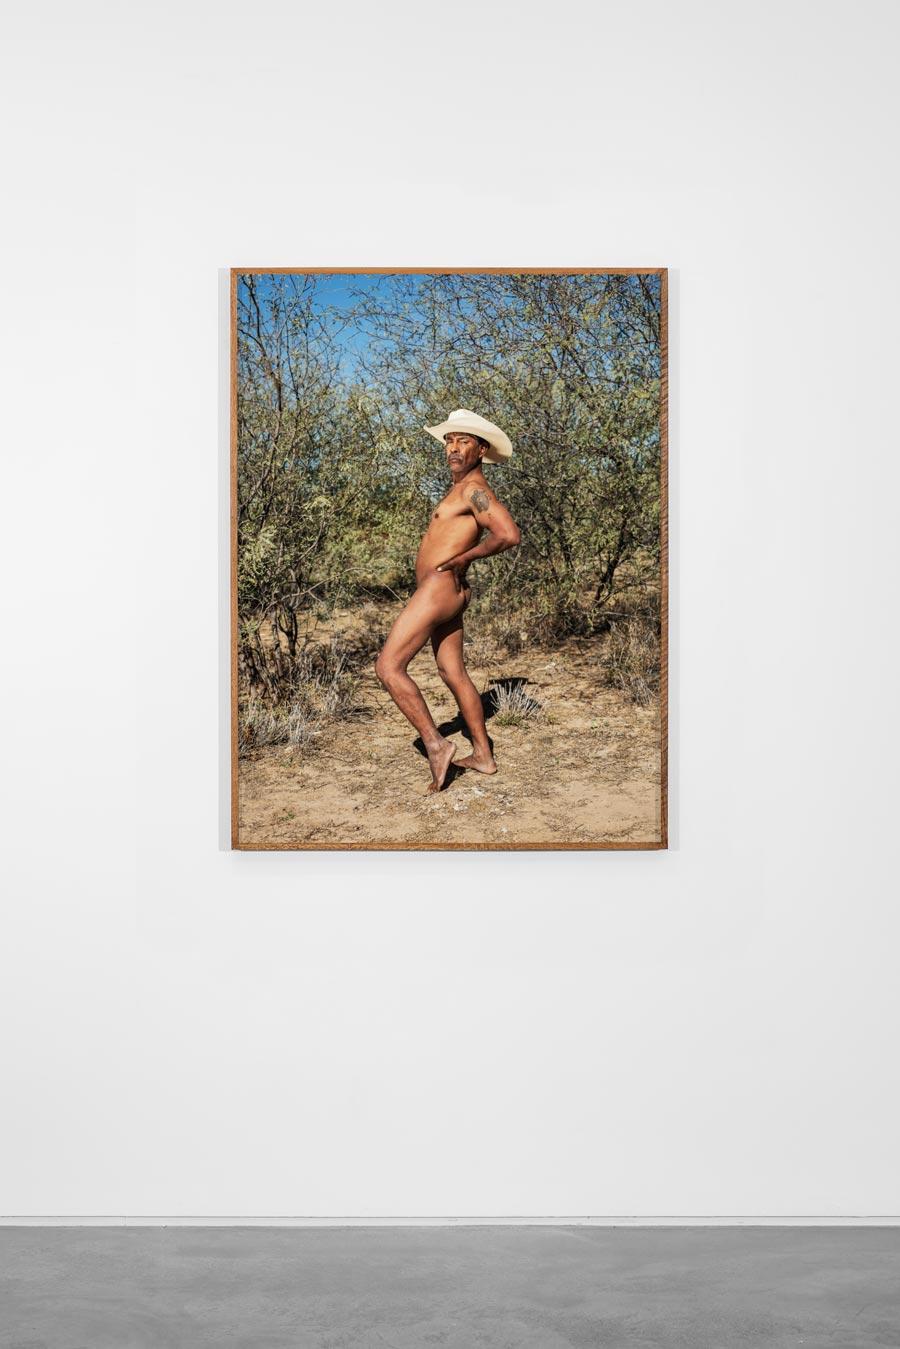 The Mirthful Cowboy, Oaxaca de Juárez, 2019 - Pieter Hugo (Colour Photography)
Signed on reverse
Archival pigment print

Available in two sizes:
47 x 35 1/2 inches, edition of 7 + 2 APs
63 x 47 inches, edition of 7 + 2 APs

Pieter Hugo (born 1976)